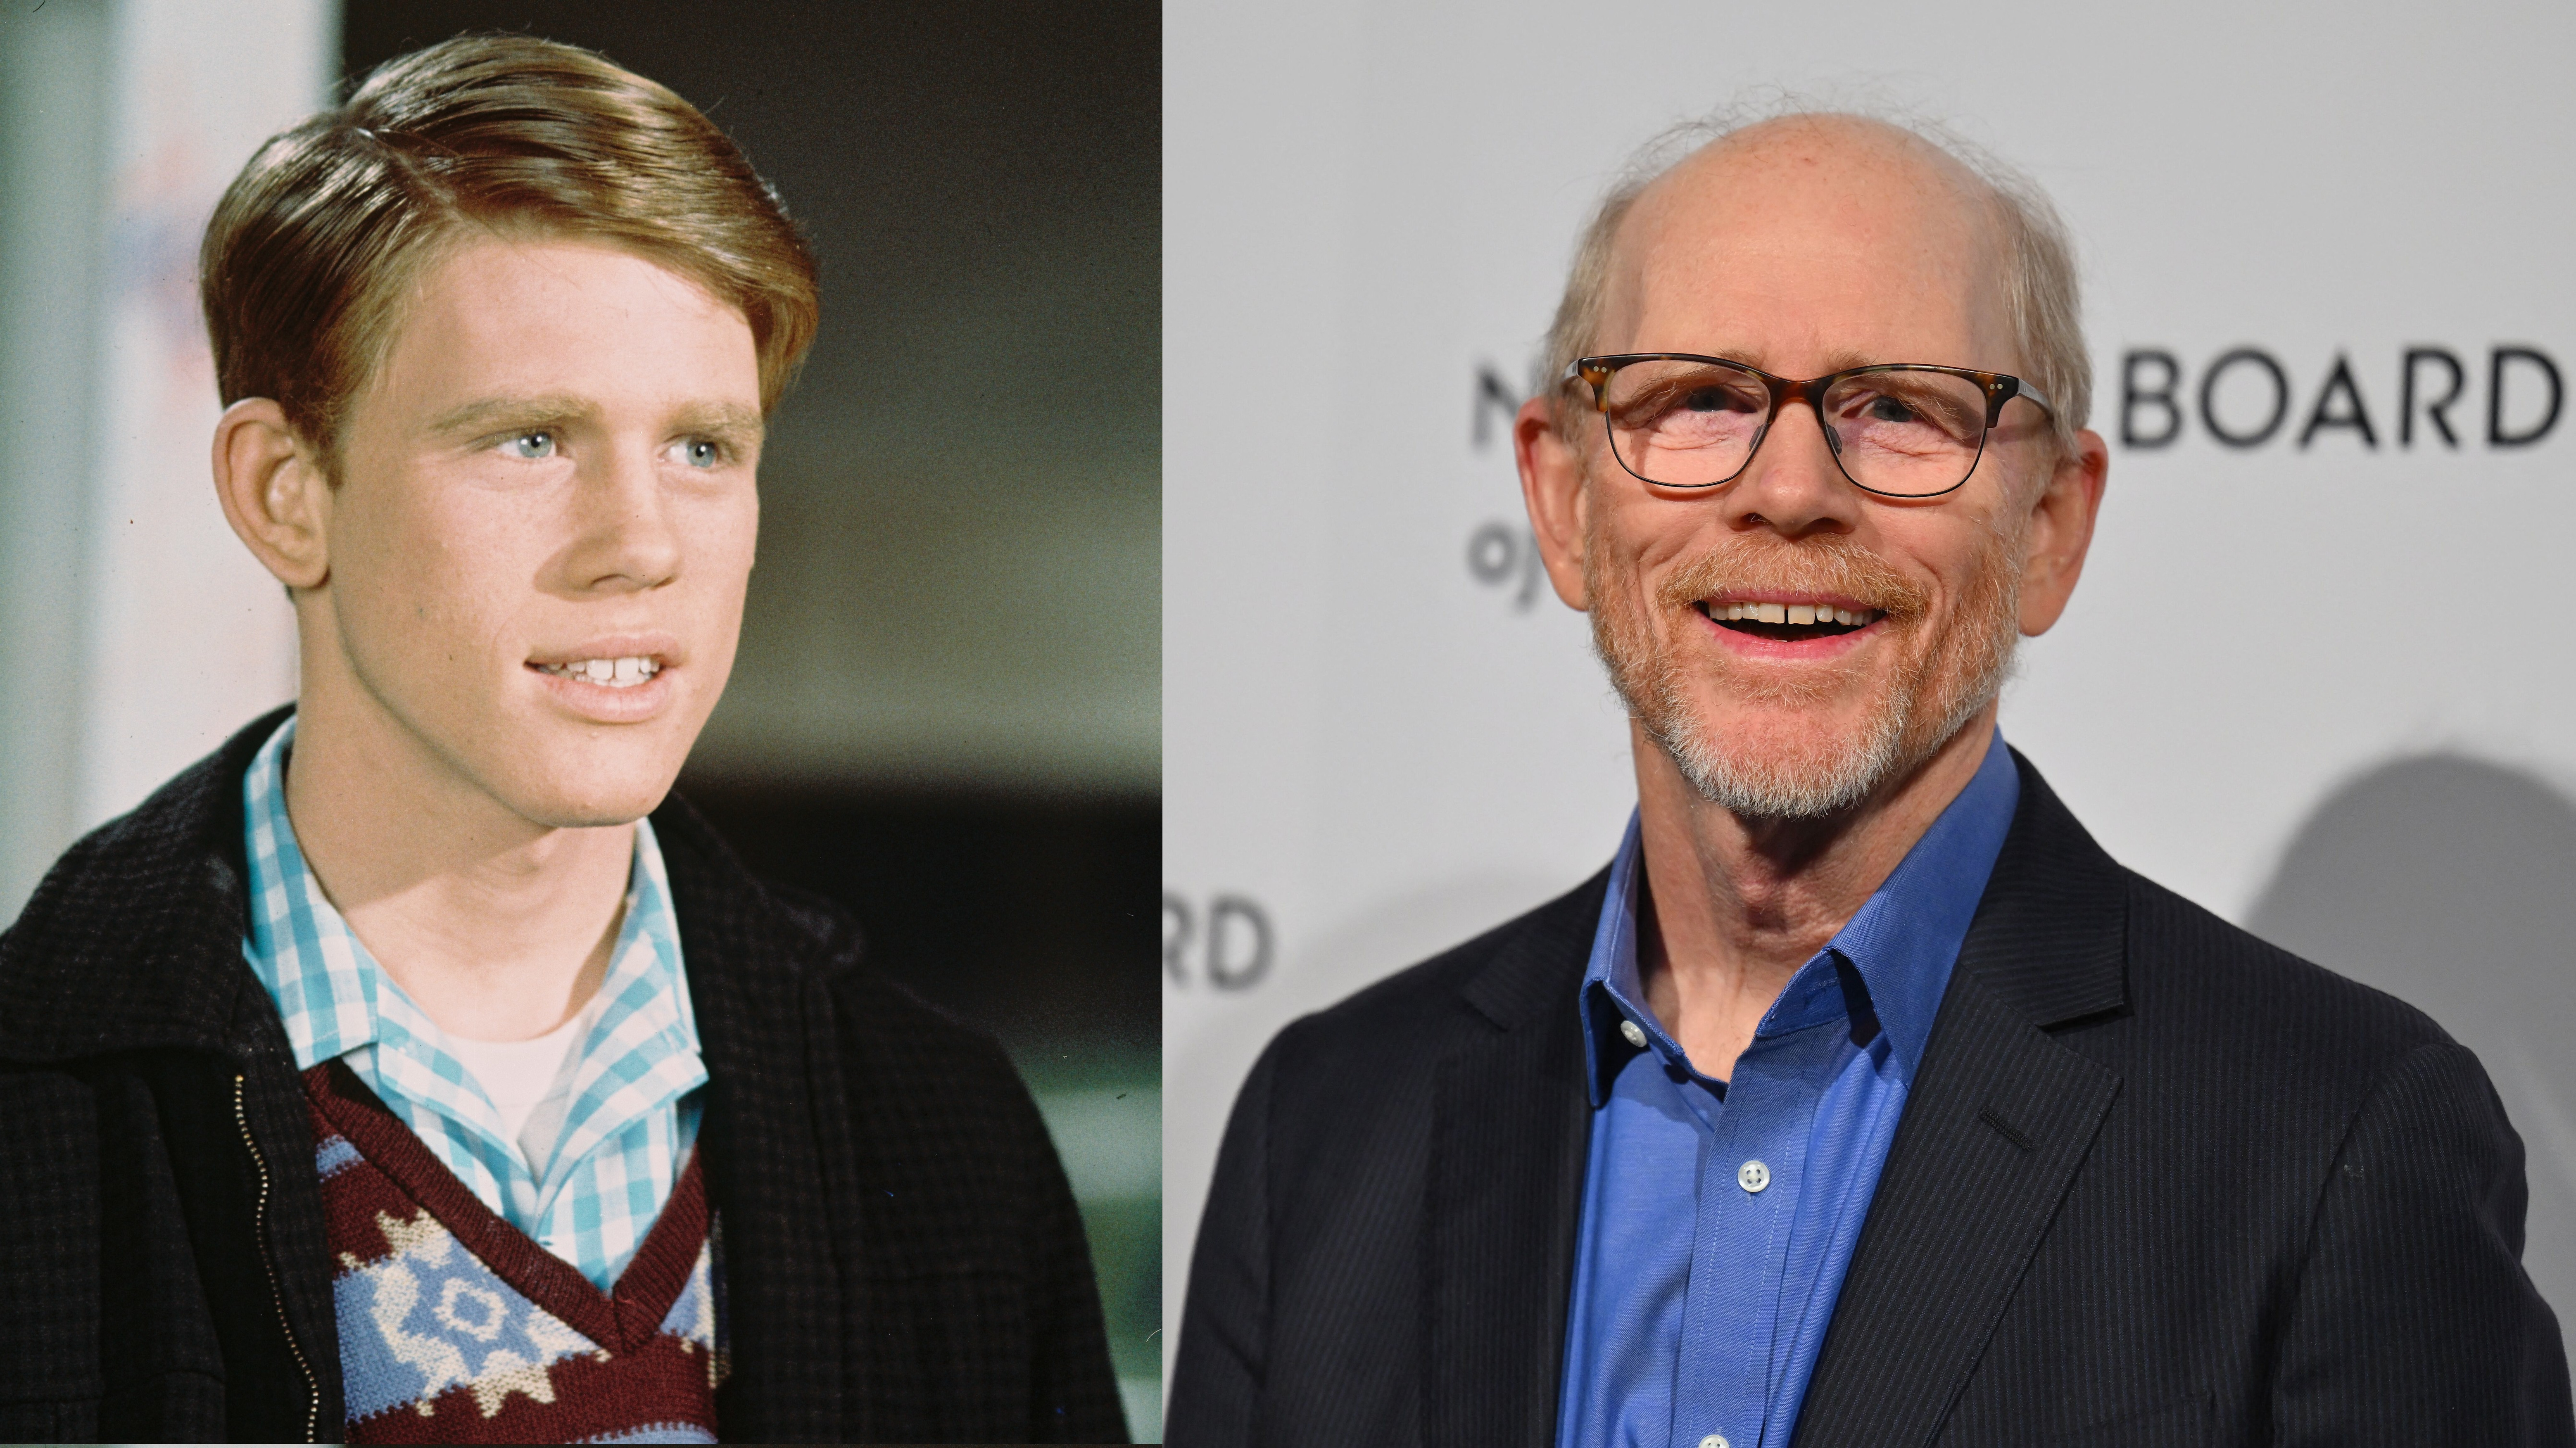 Ron Howard, wearing a black jacket, V-neck jumper and a blue shirt in a publicity still issued for the US television series, "Happy Days," circa 1977. | Ron Howard arrives for the National Board of Review Awards Gala at Cipriani 42nd Street in New York City on January 8, 2023. | Source: Getty Images